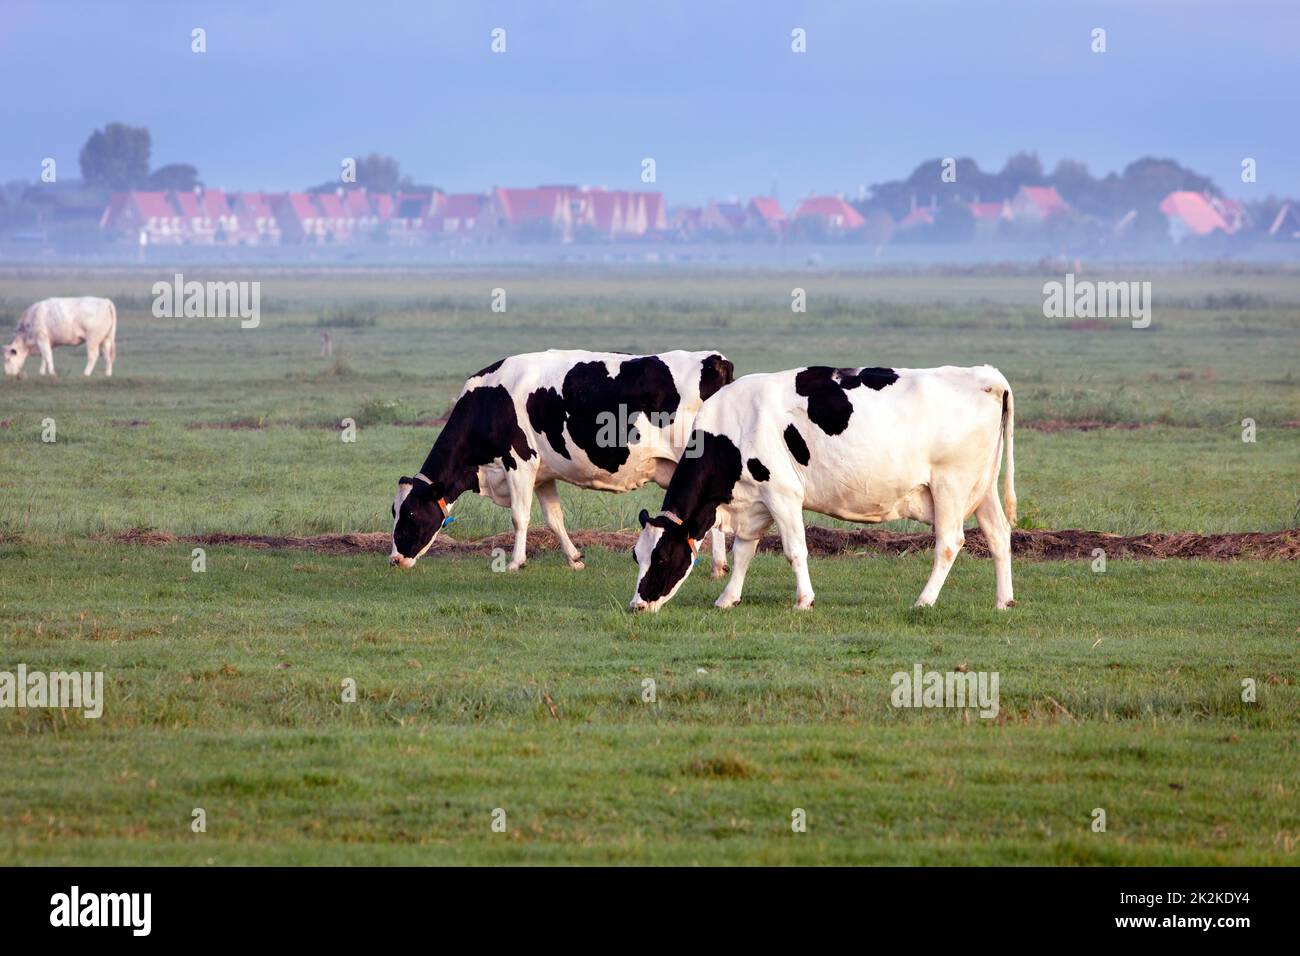 Cows grazing I the Netherlands with the village Maasland in municipality Midden-Delfland in the background Stock Photo